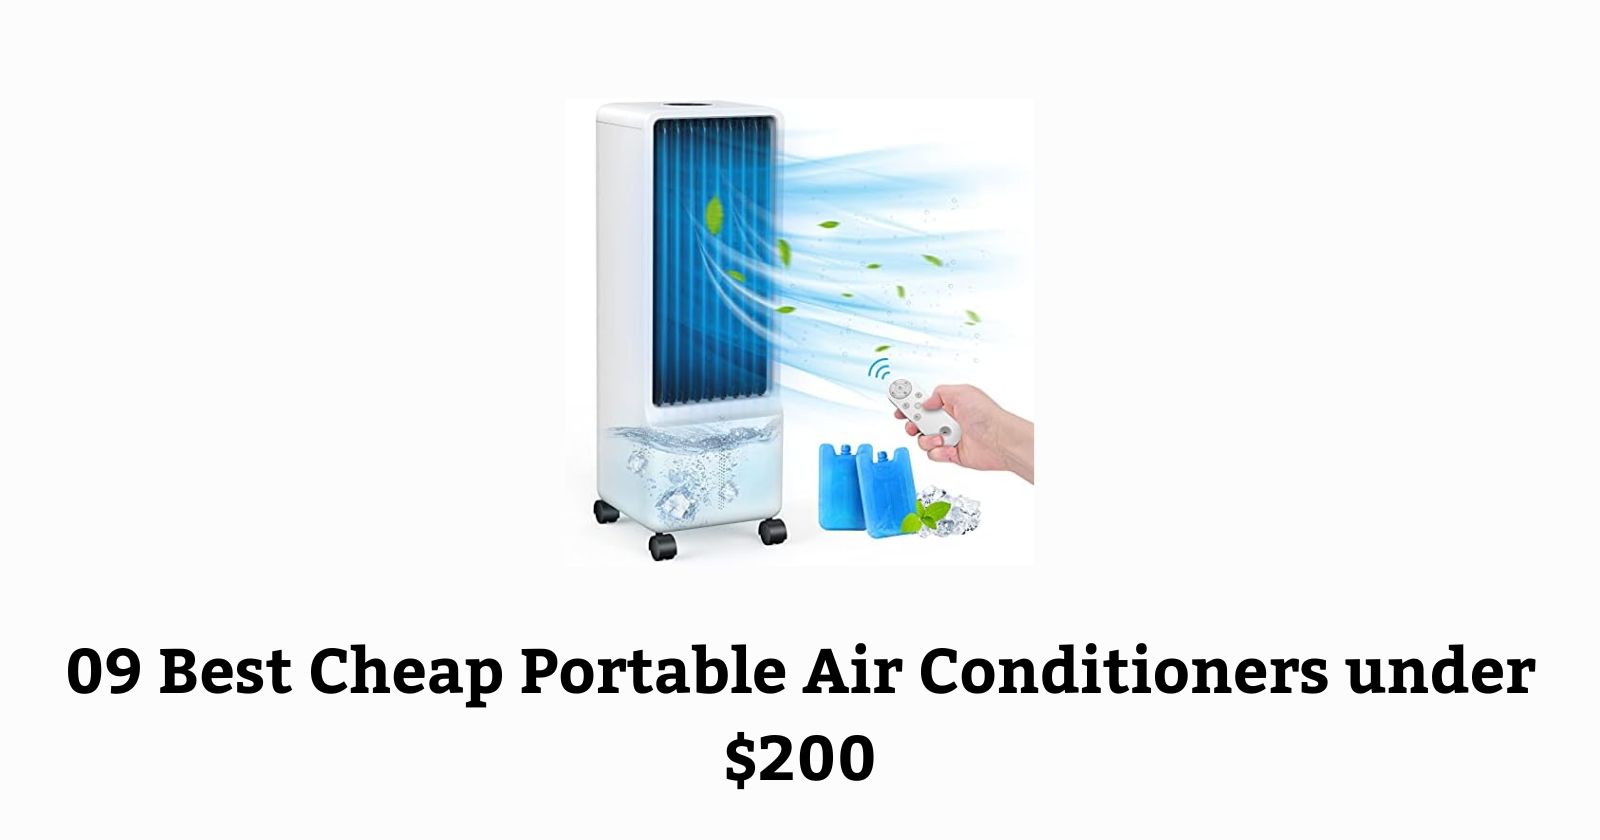 06 Best Portable Air Conditioners For Camping